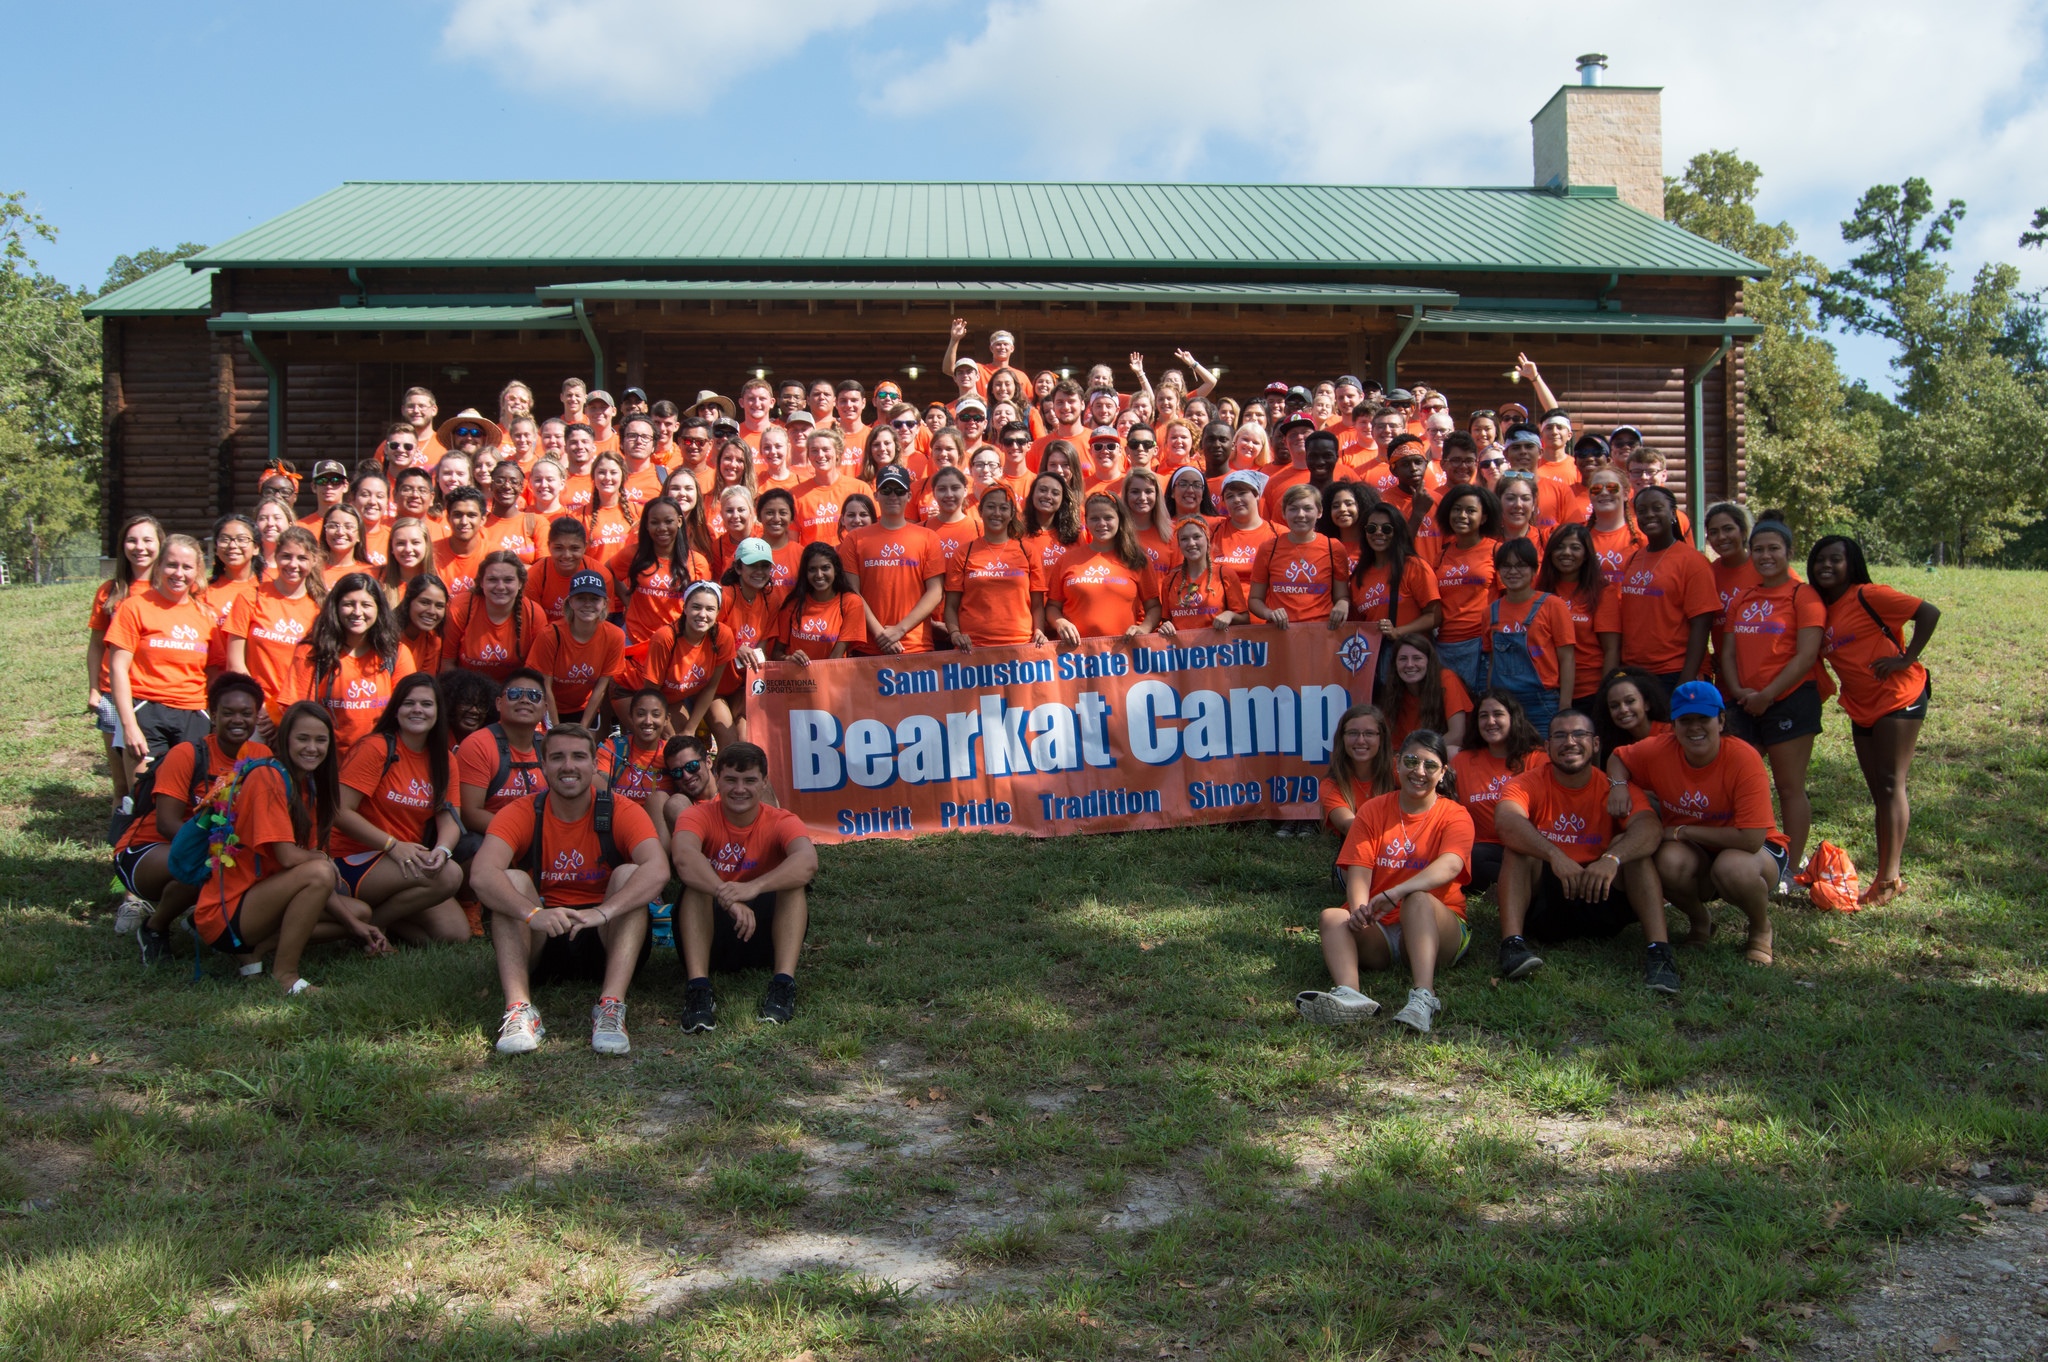 Large group of students at Bearkat Camp.